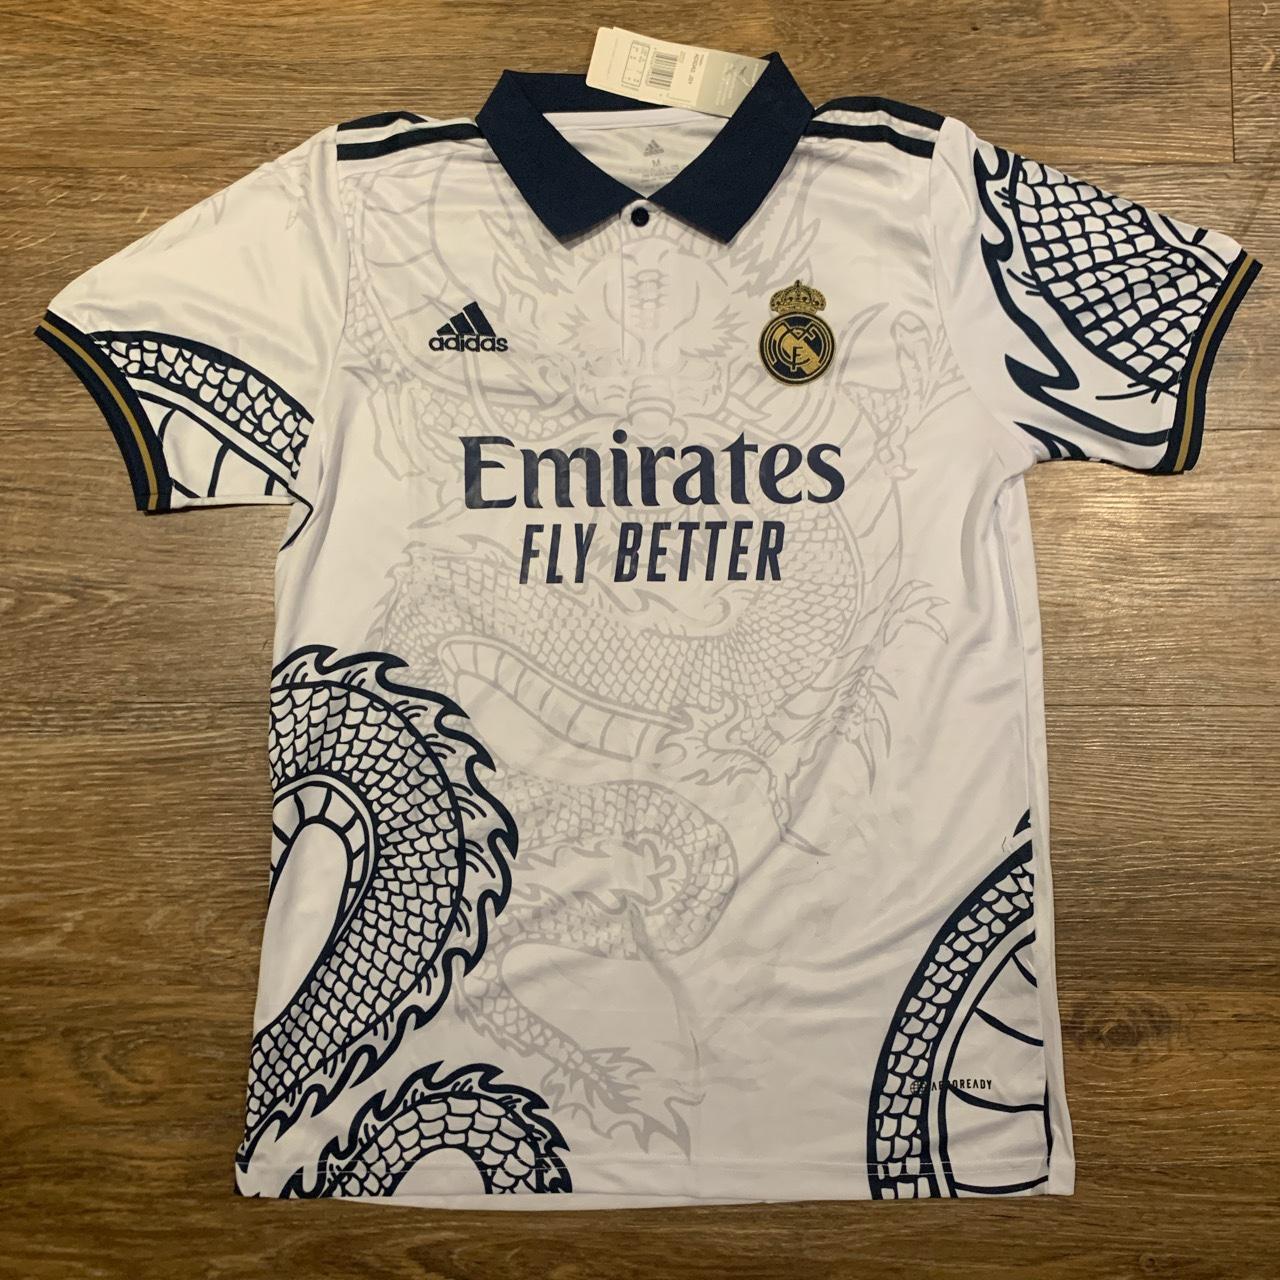 Real Madrid White Dragon 23/24 Jersey Open to Offers ️ - Depop